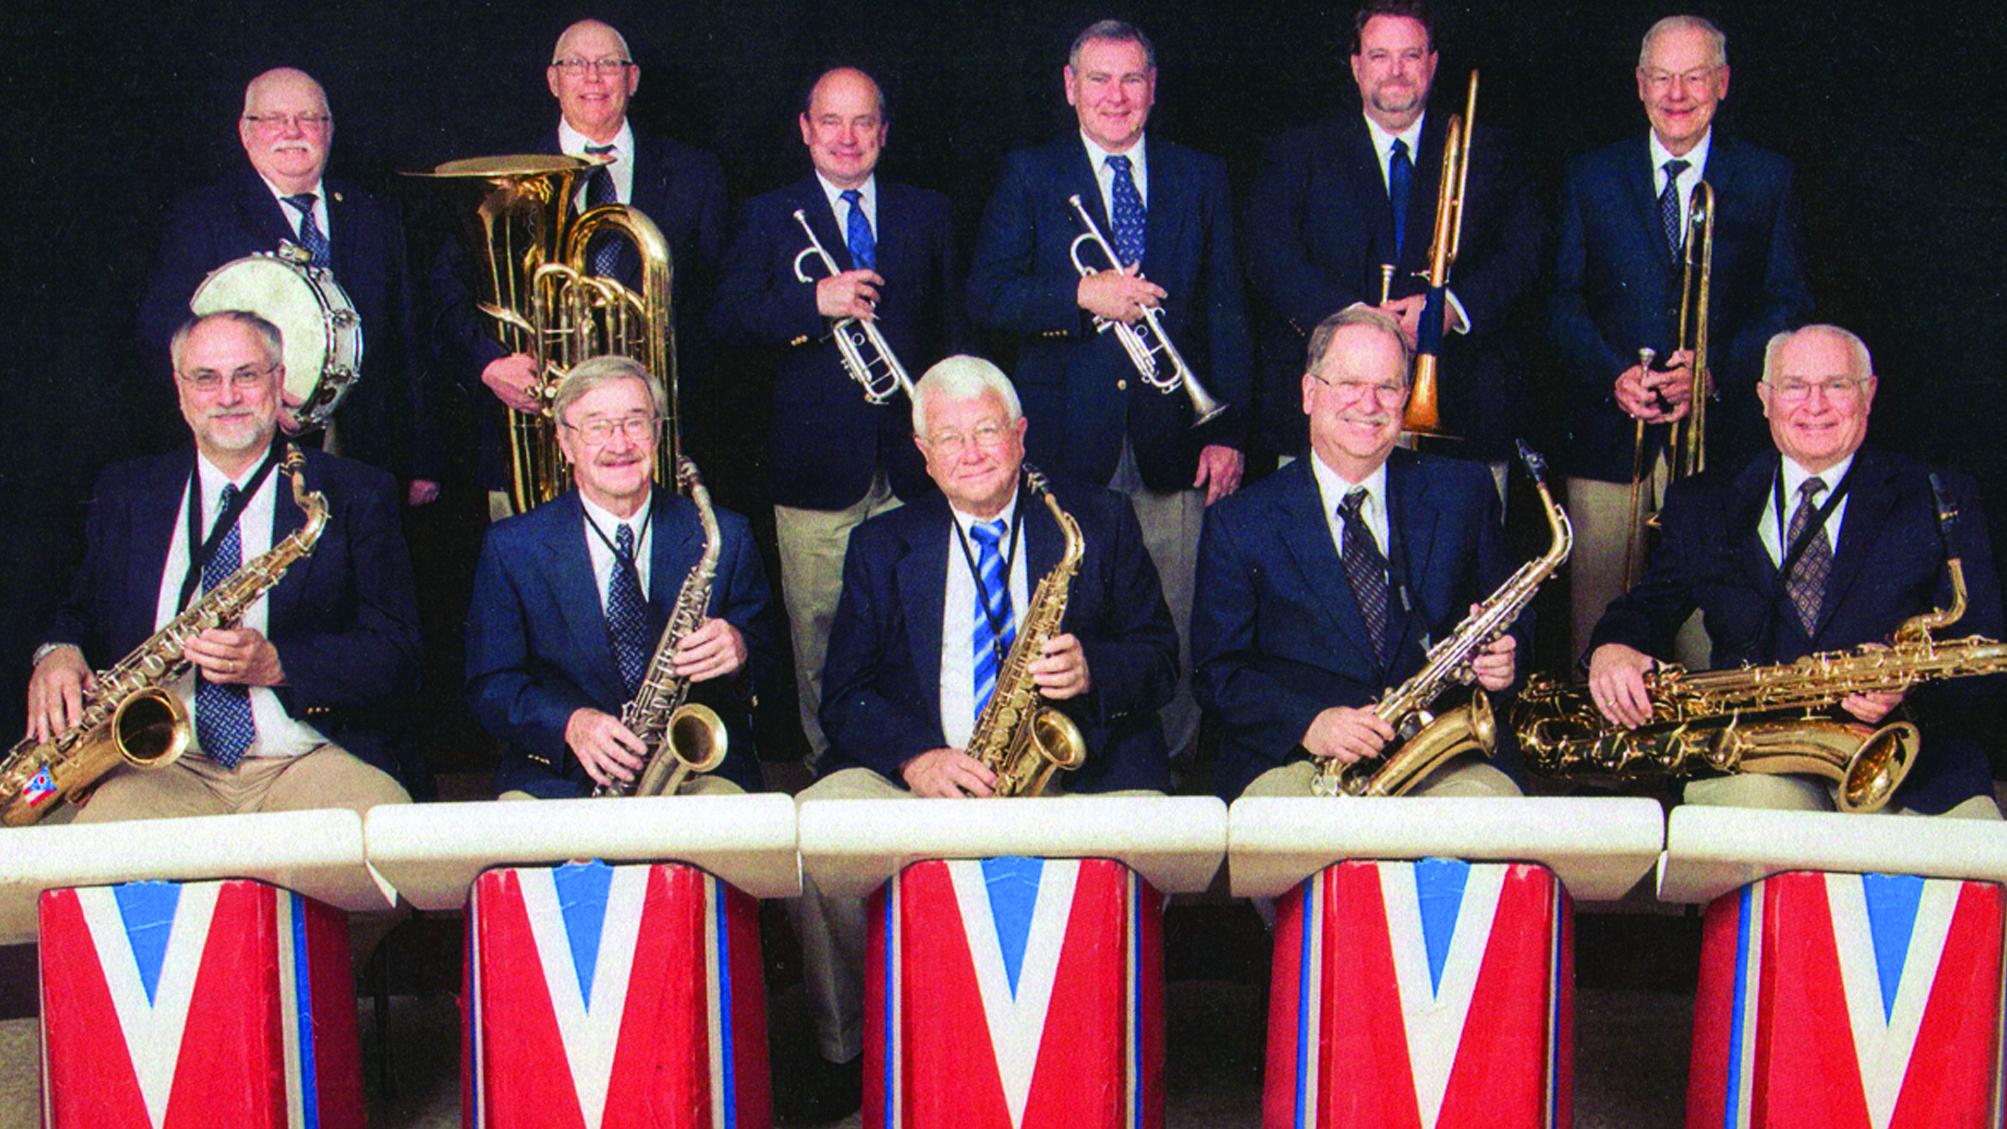 eleven member big band sitting with instruments in front of red, white, blue band stand